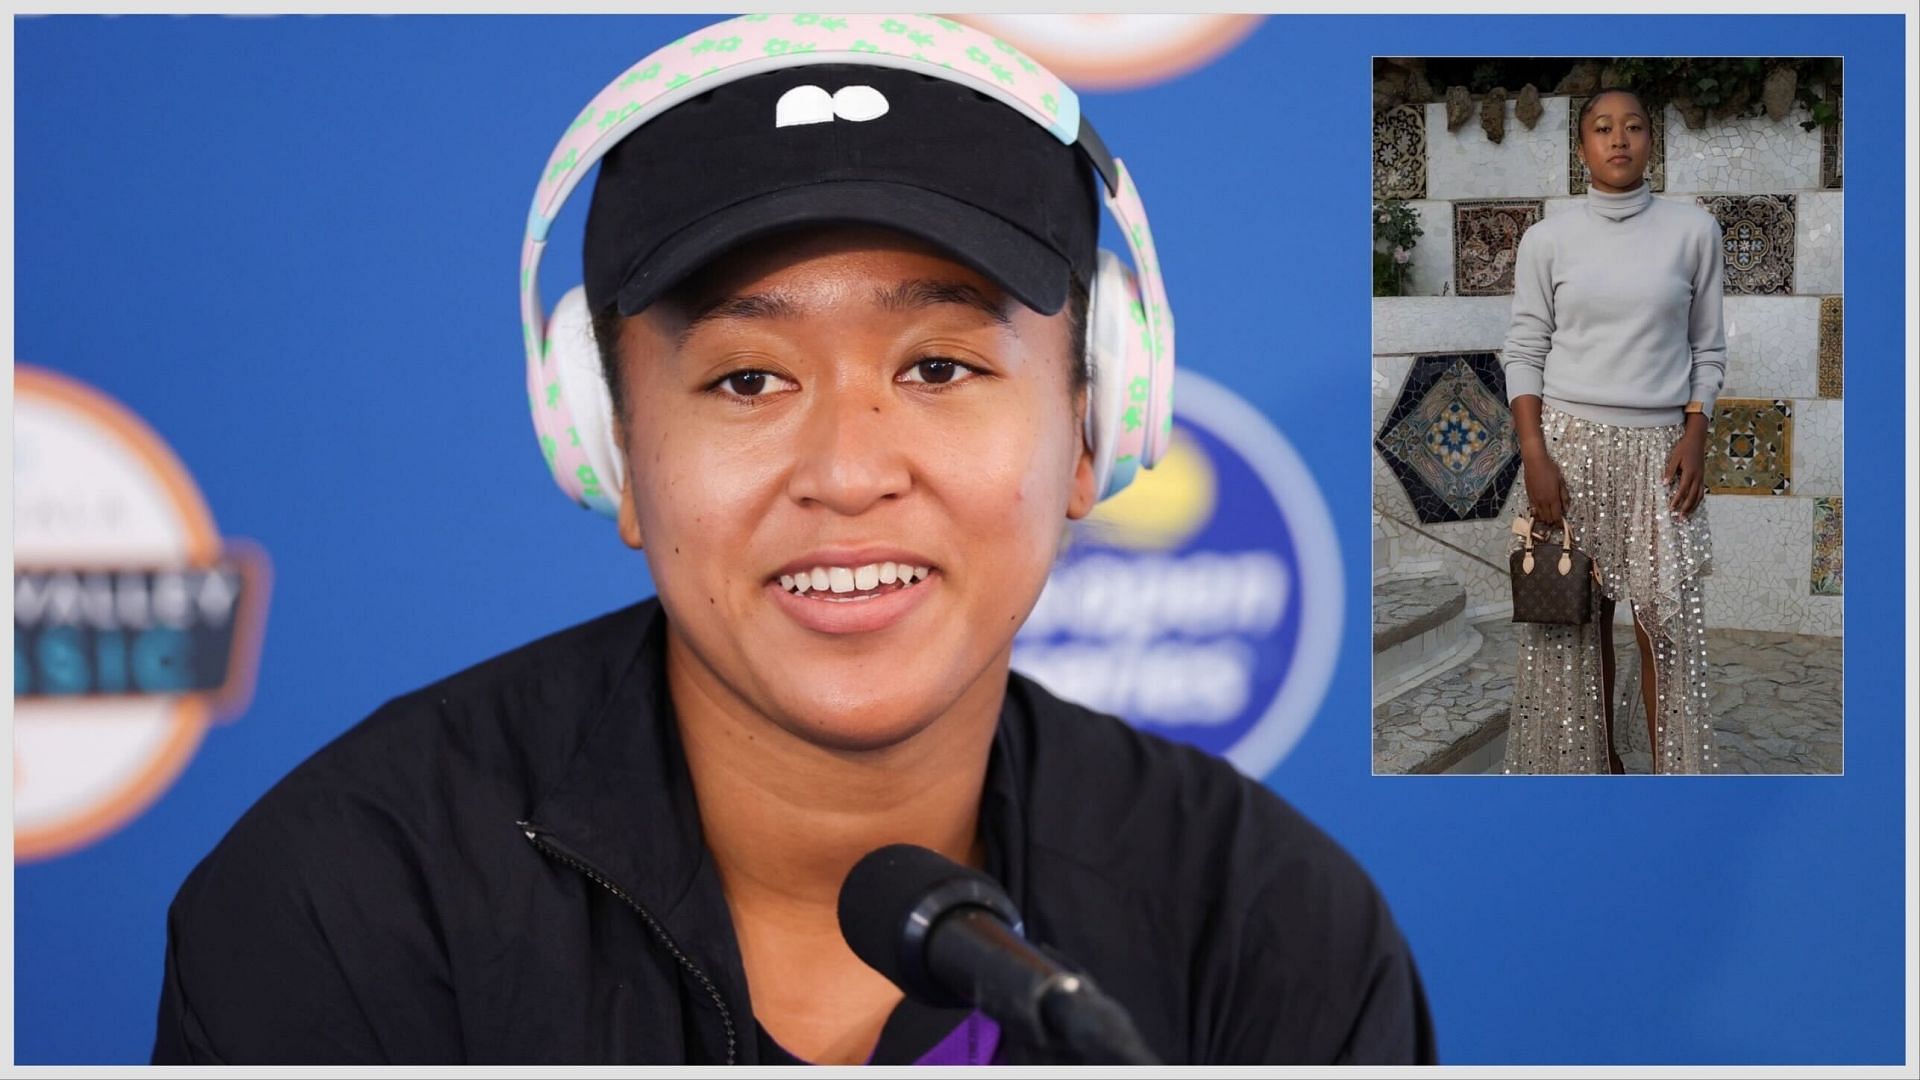 Fans were amused by Naomi Osaka as she attended a Louis Vuitton show in Barcelona two days before her first-round match at the French Open (Source: Getty Images and Instagram/Naomi Osaka)